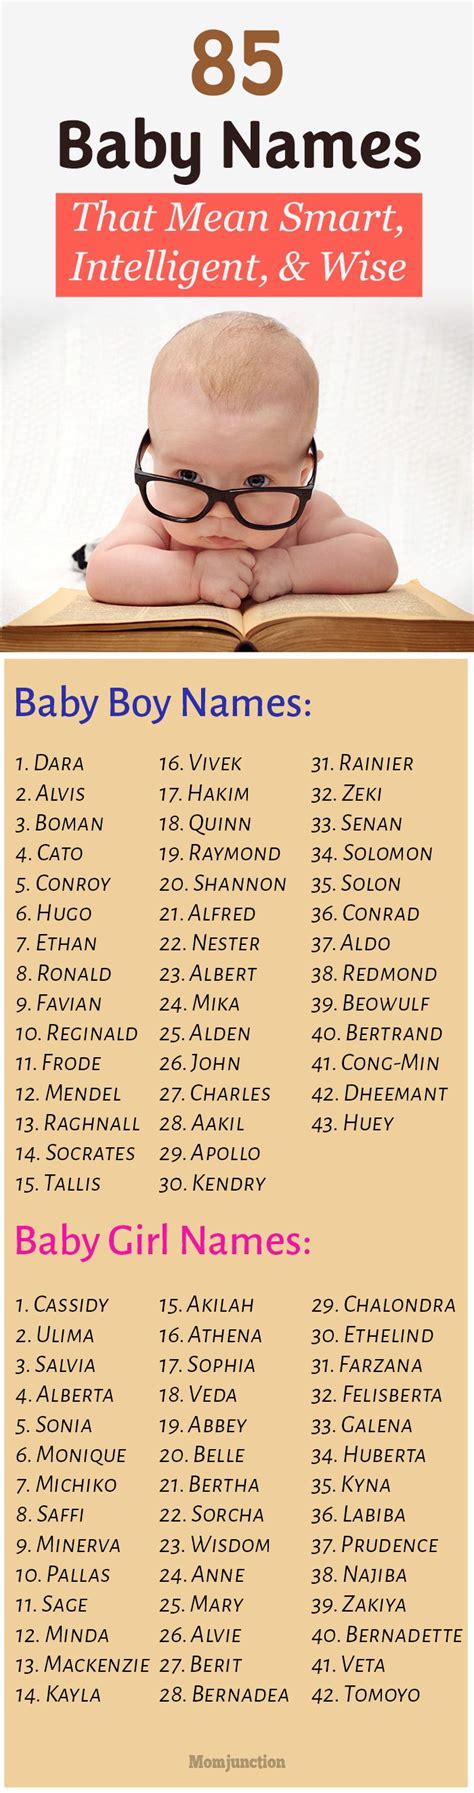 85 Unique Intelligent Wise And Smart Baby Names Baby Names 2018